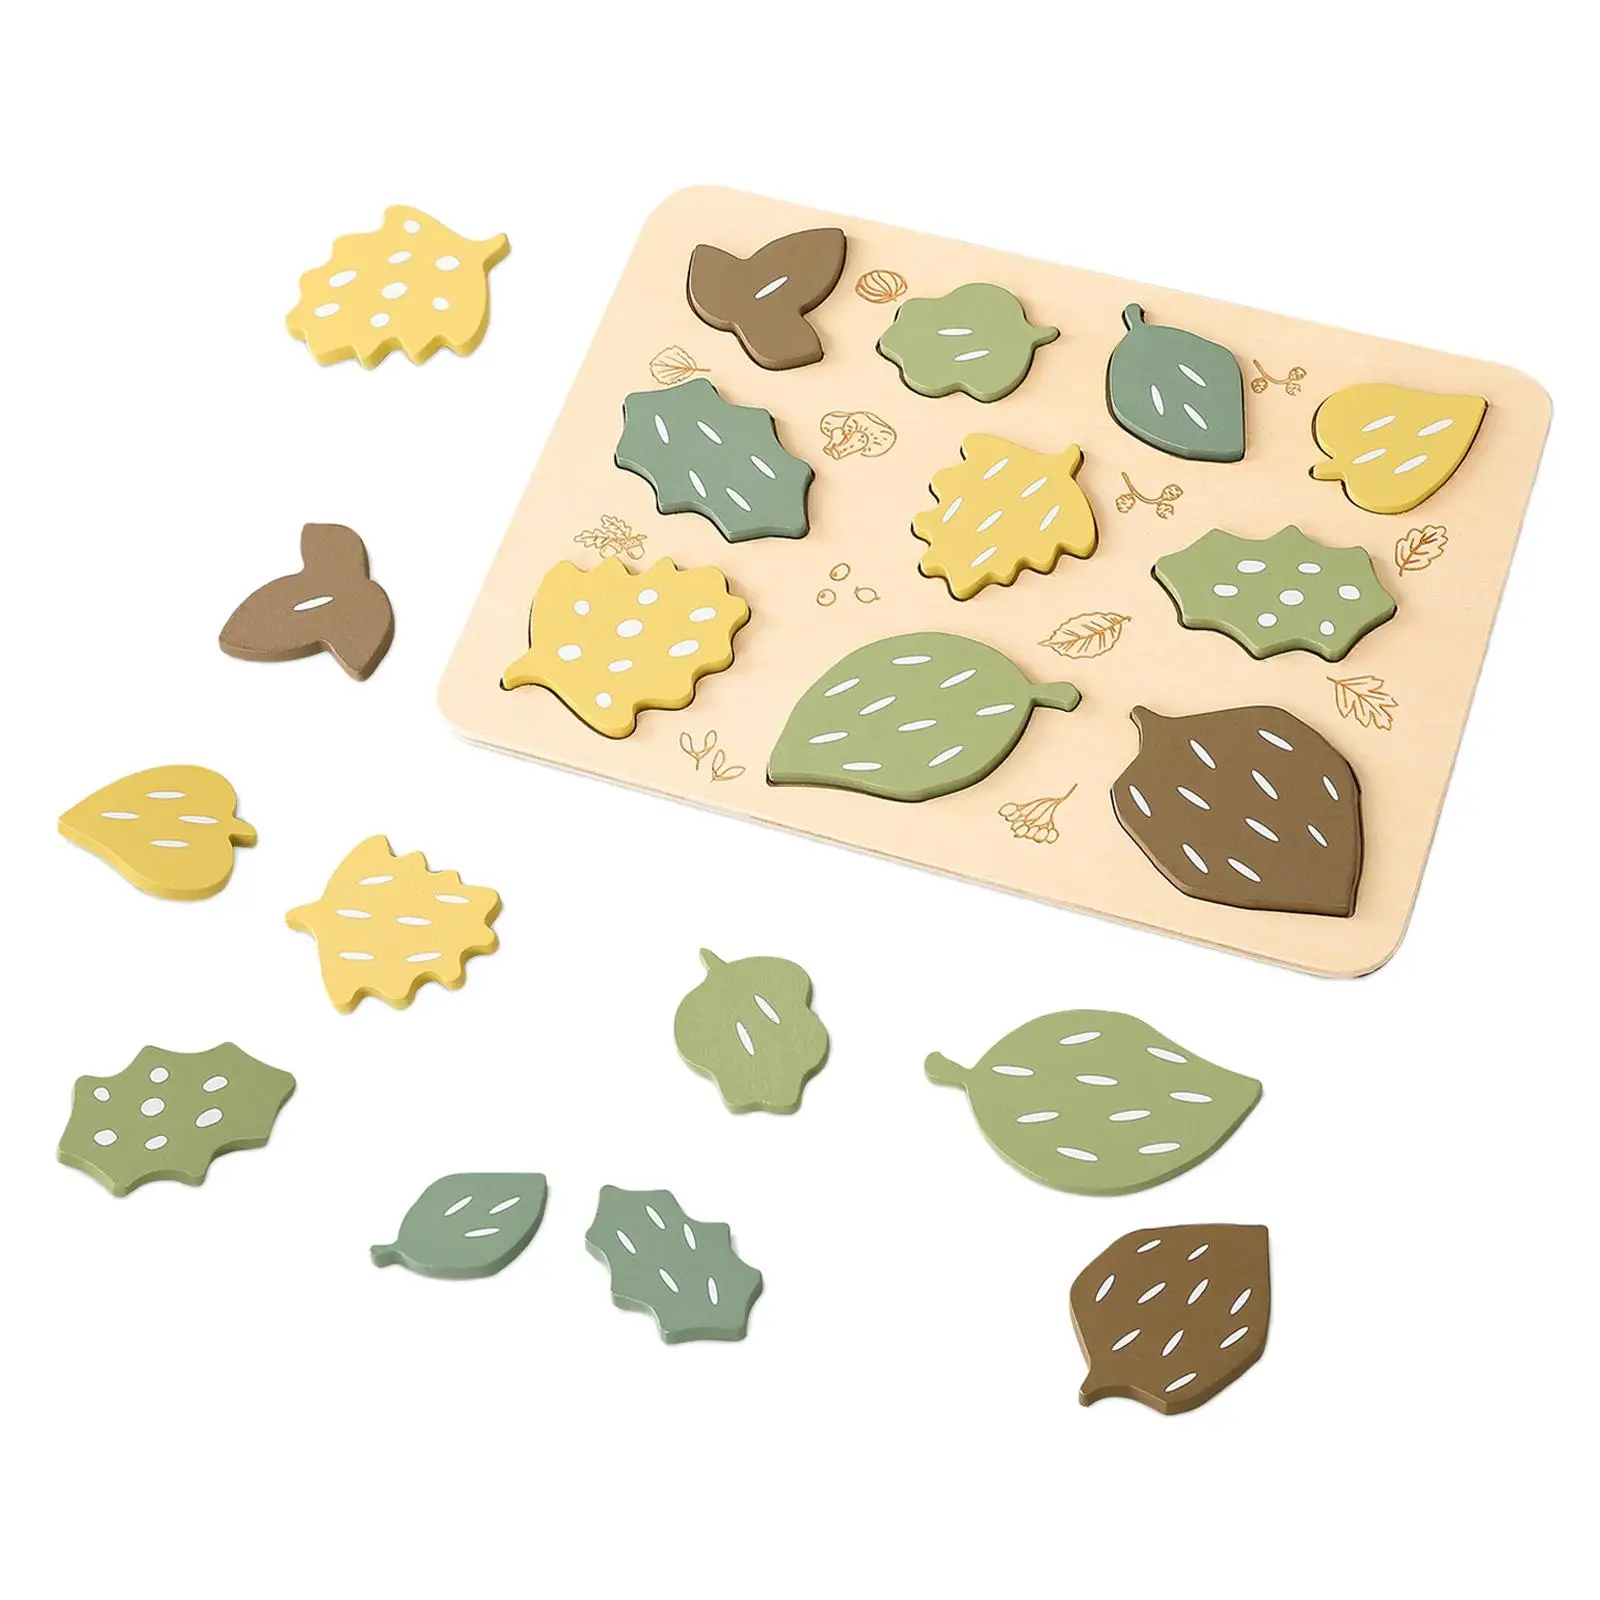 Leaf Jigsaw Puzzles Hand Eye Coordination Colorful Shape for Girls Kids